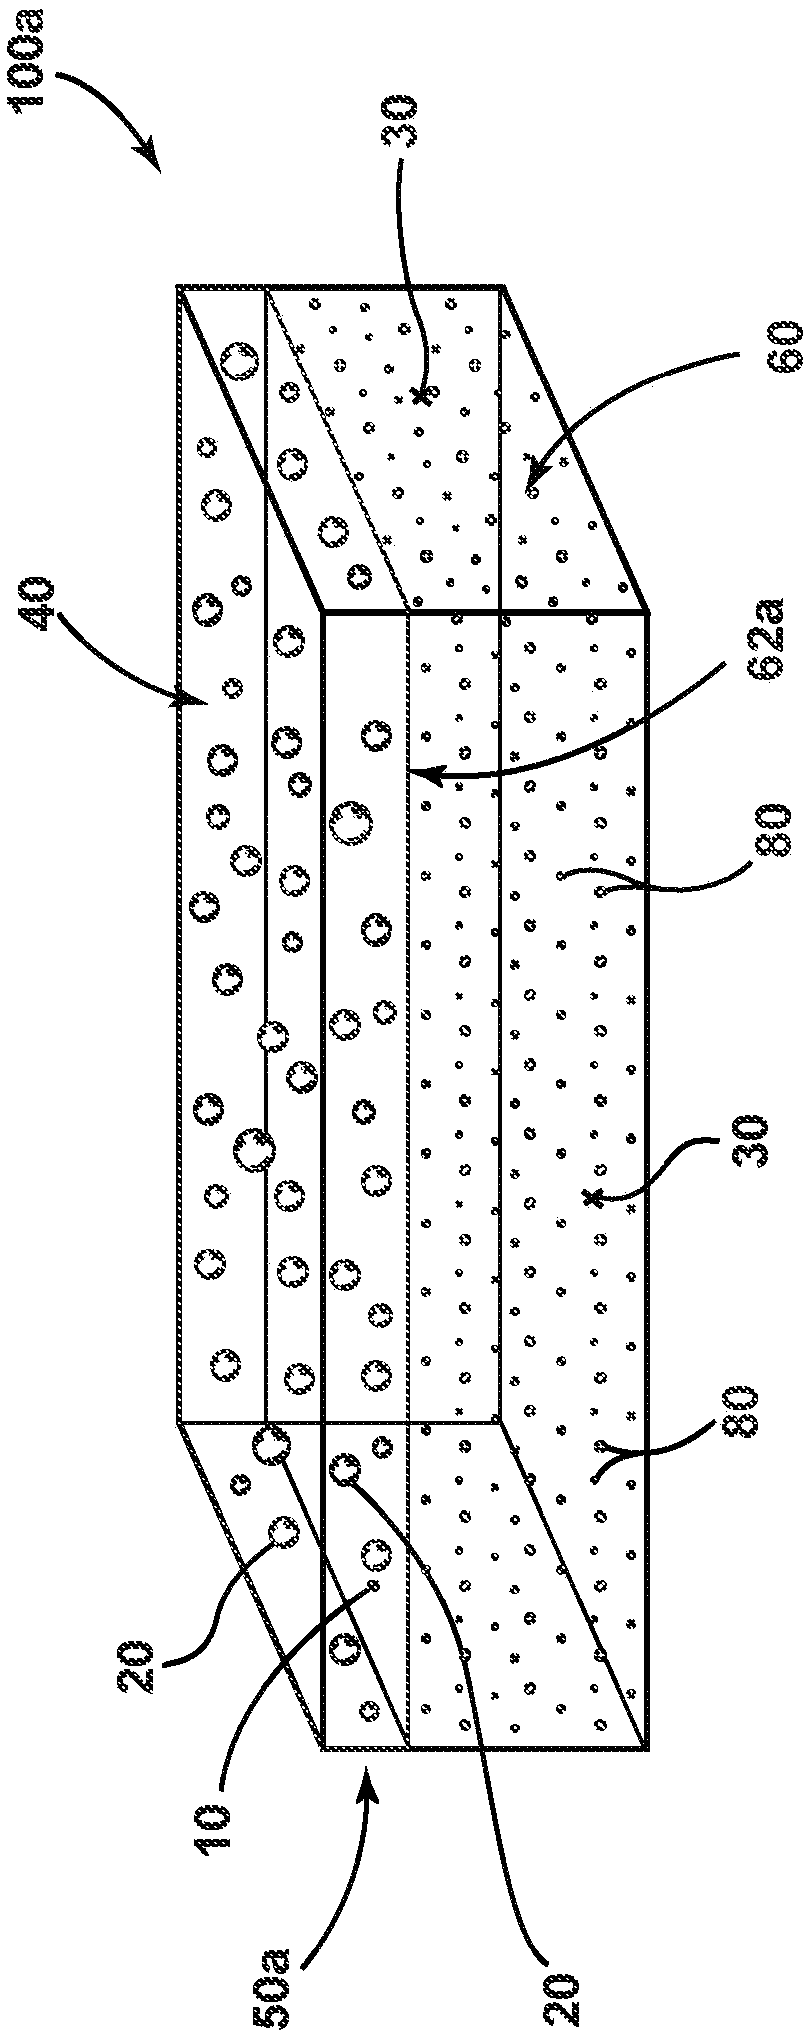 Antimicrobial phase-separable glass/polymer articles and methods for making the same